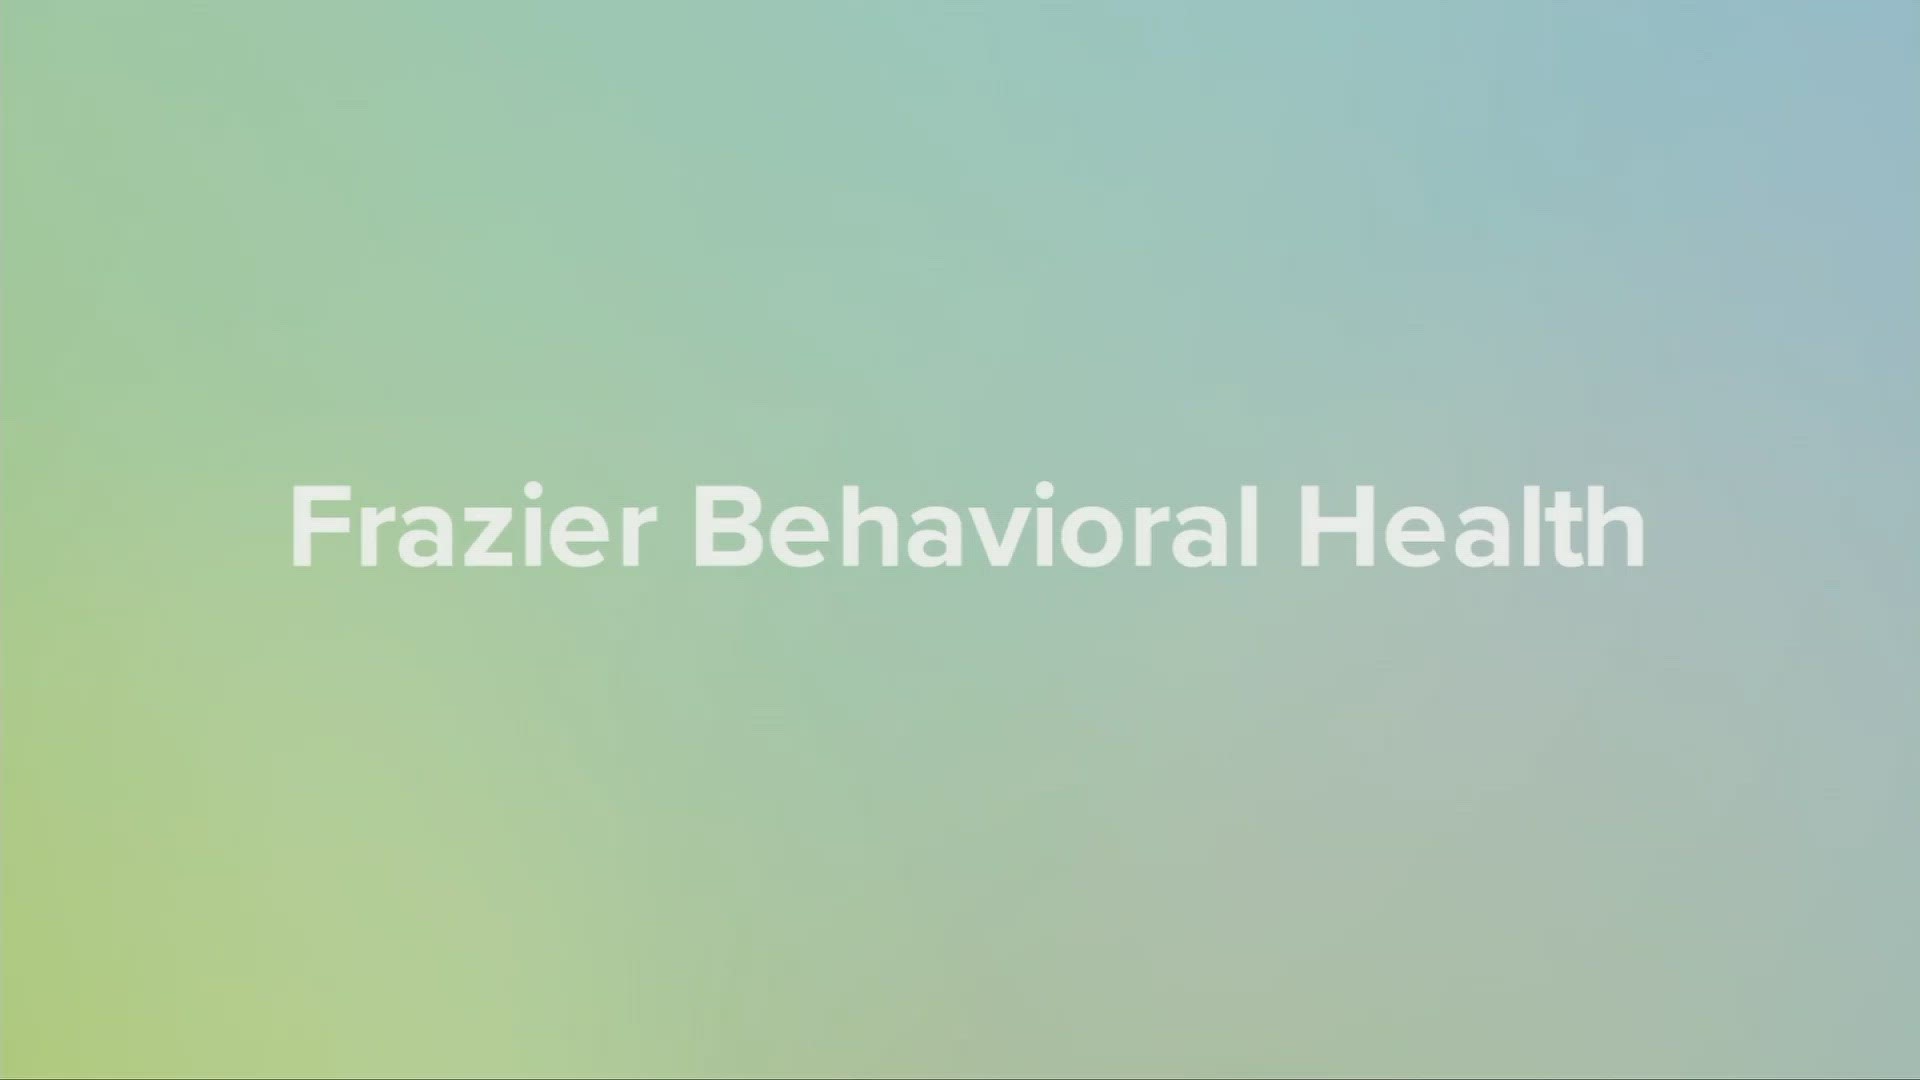 Joe talks to Ali Frazier about hidden social rules that neurodivergent people have to learn that others may not think about. Sponsored by: Frazier Behavioral Health